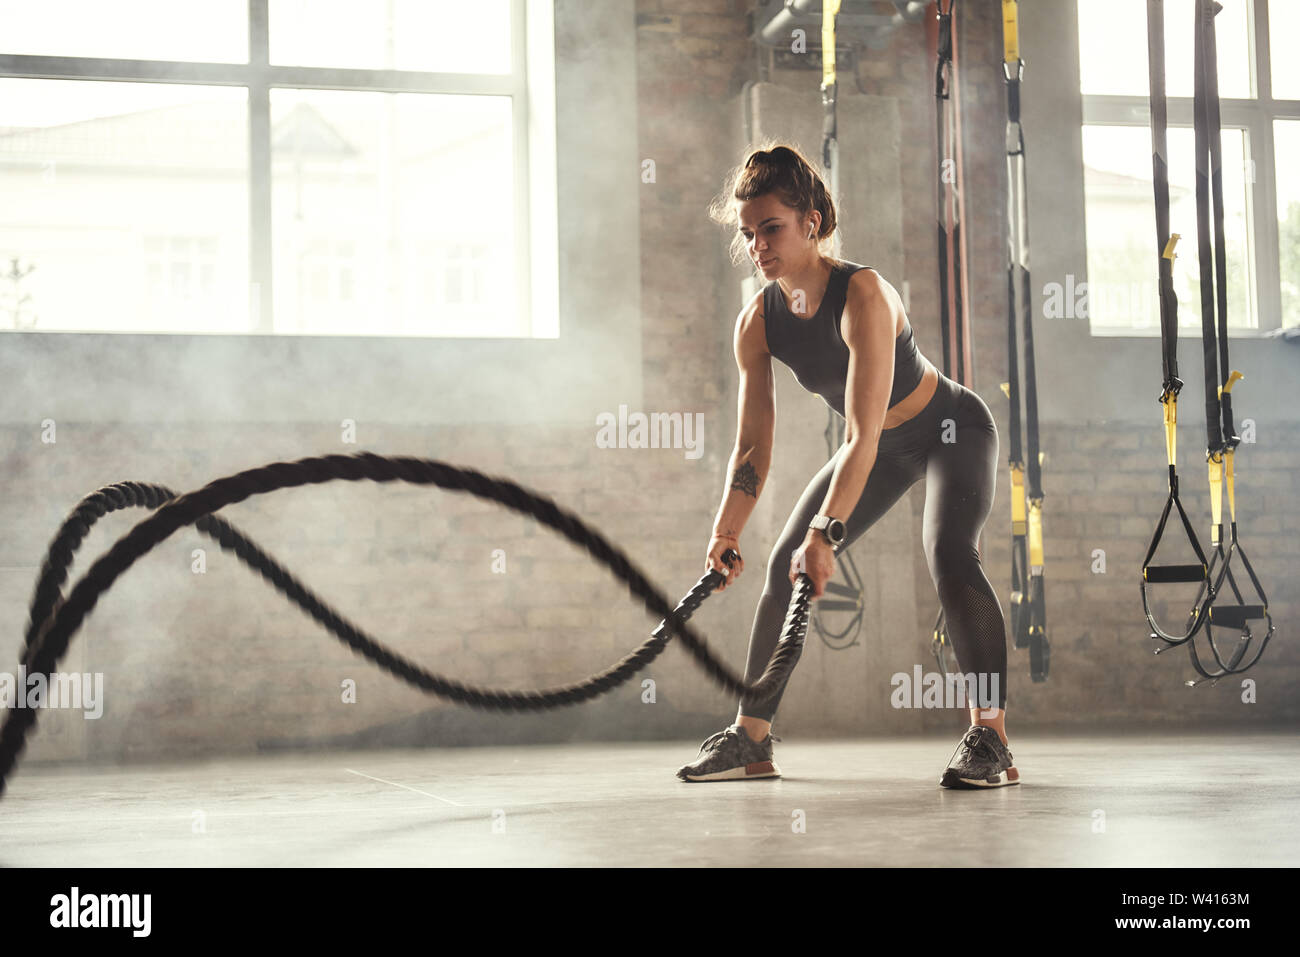 https://c8.alamy.com/comp/W4163M/preparing-for-the-competition-young-athletic-woman-with-perfect-body-doing-crossfit-exercises-with-a-rope-in-the-gym-crossfit-concept-workout-exercises-concept-W4163M.jpg